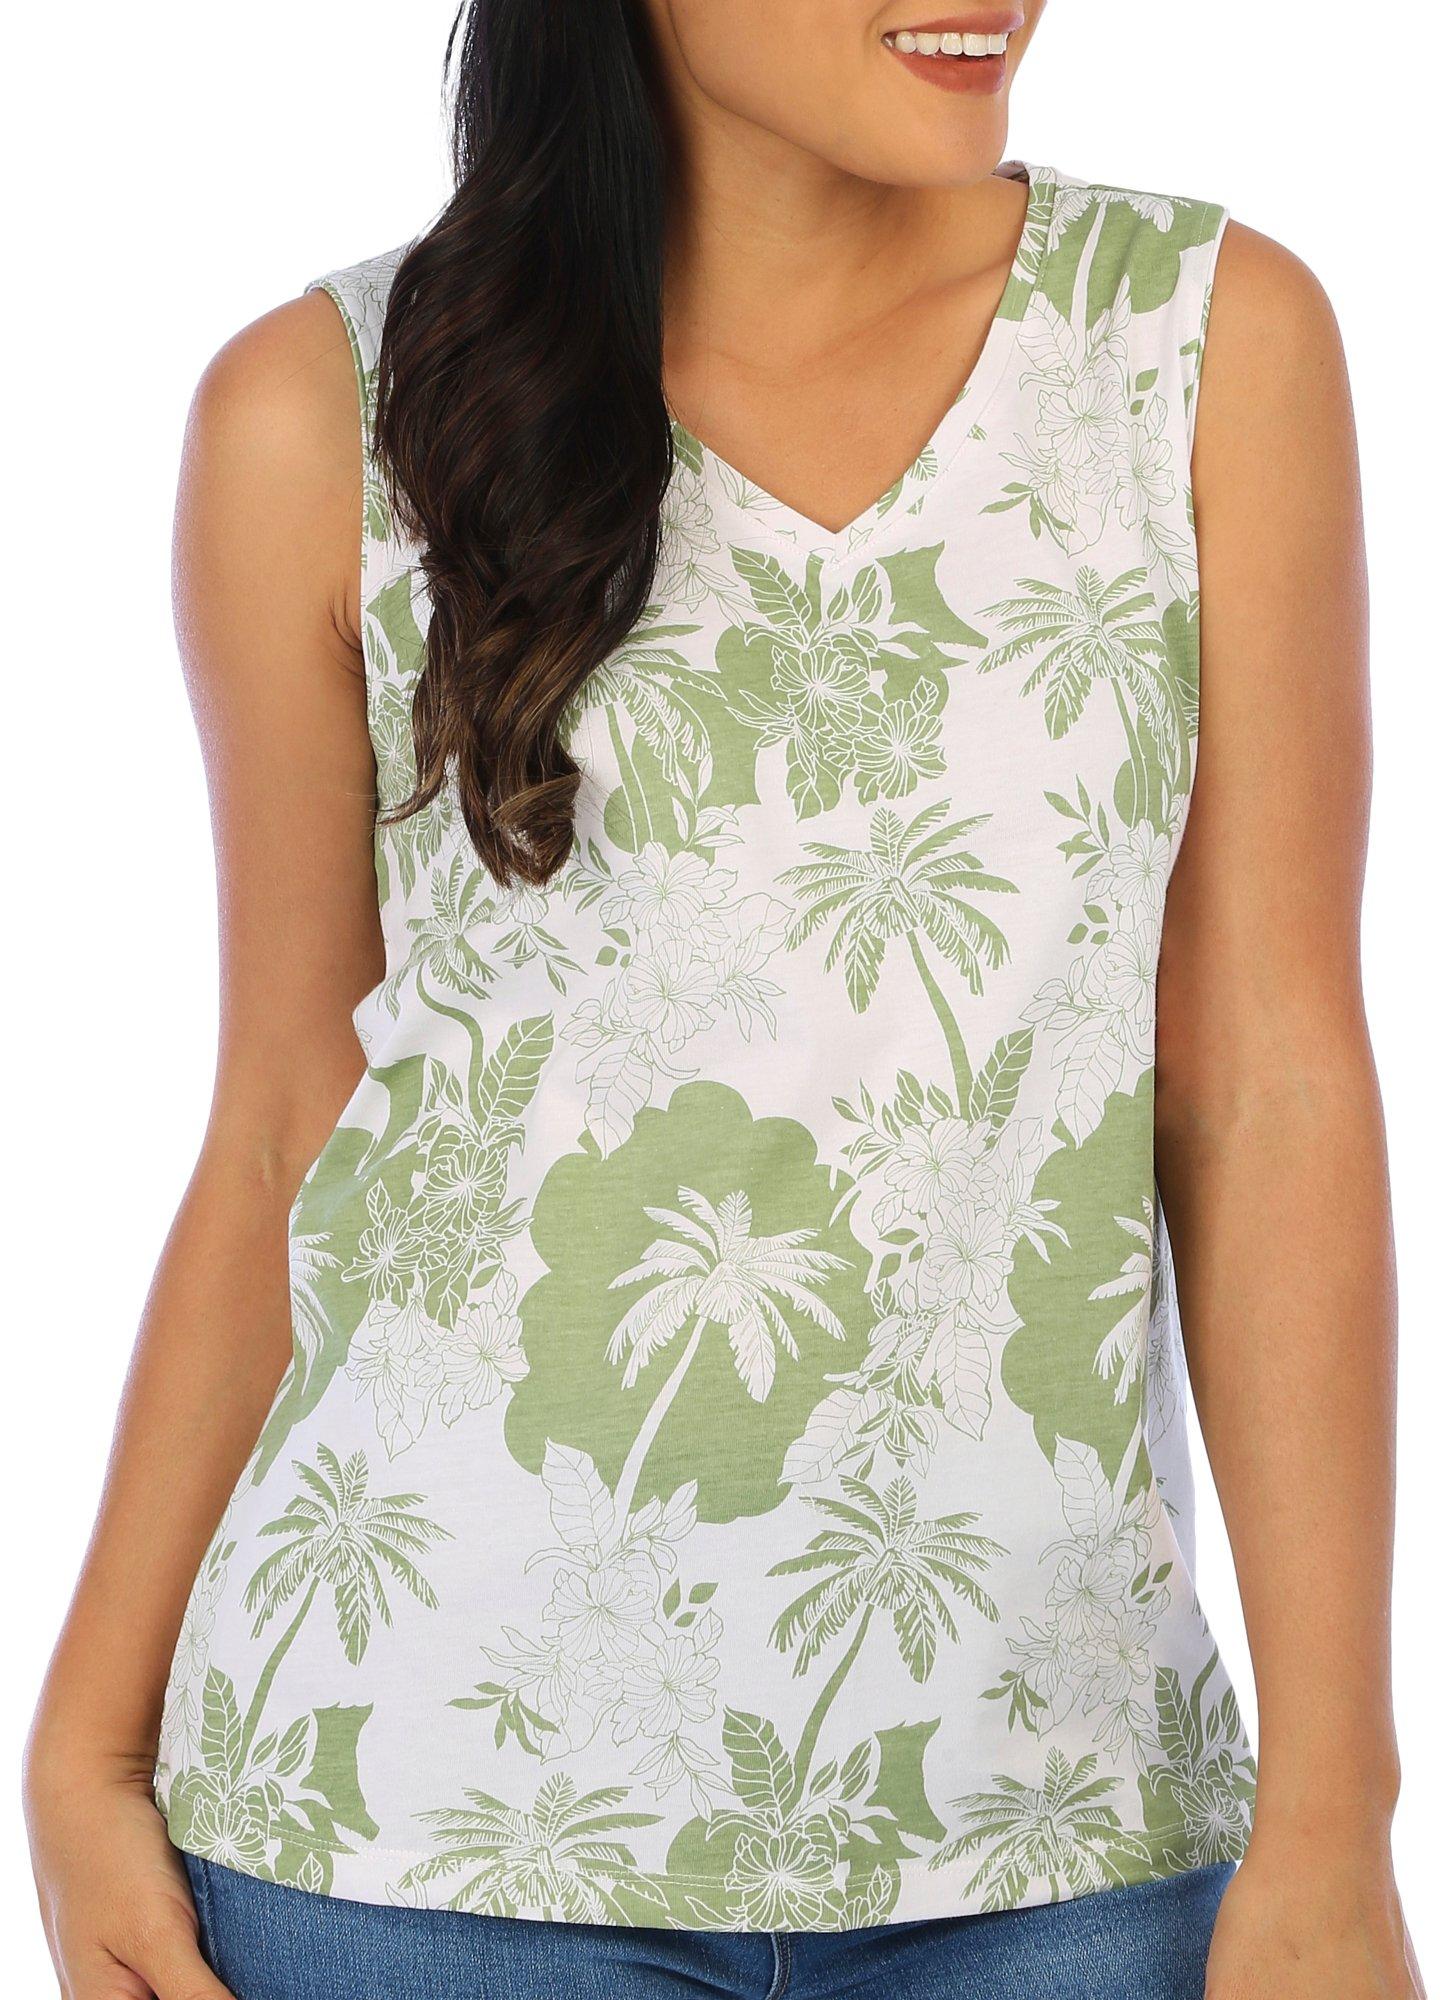 Coral Bay Womens Floral & Palm Print V-Neck Sleeveless Top